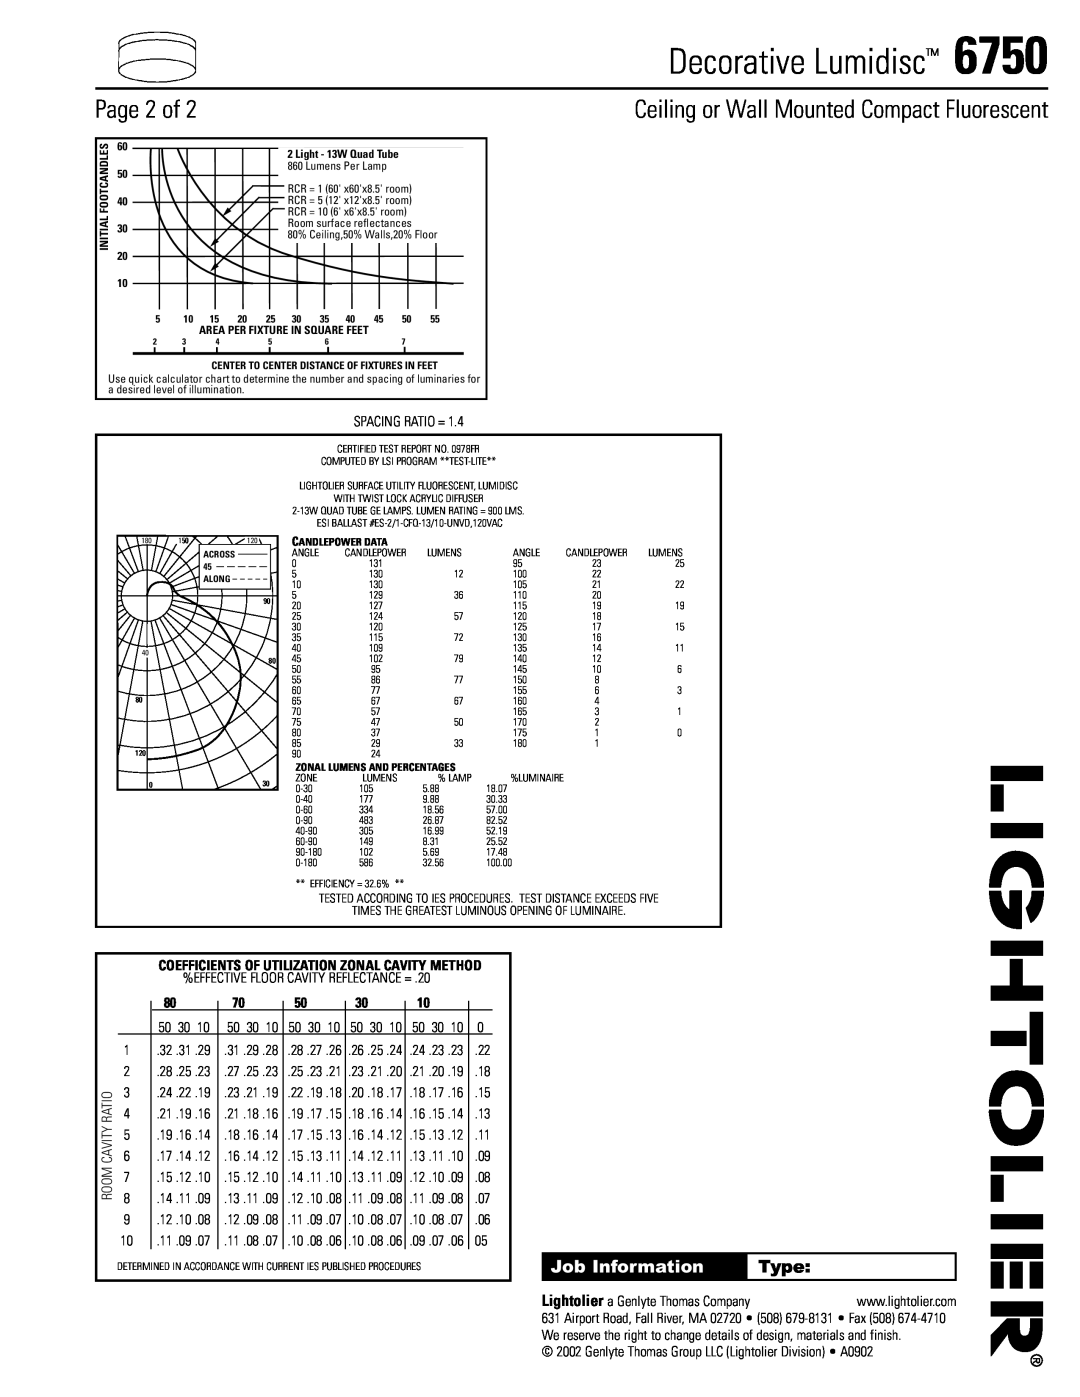 Lightolier 6750 manual Page 2 of, Type, Decorative Lumidisc, Ceiling or Wall Mounted Compact Fluorescent, Job Information 